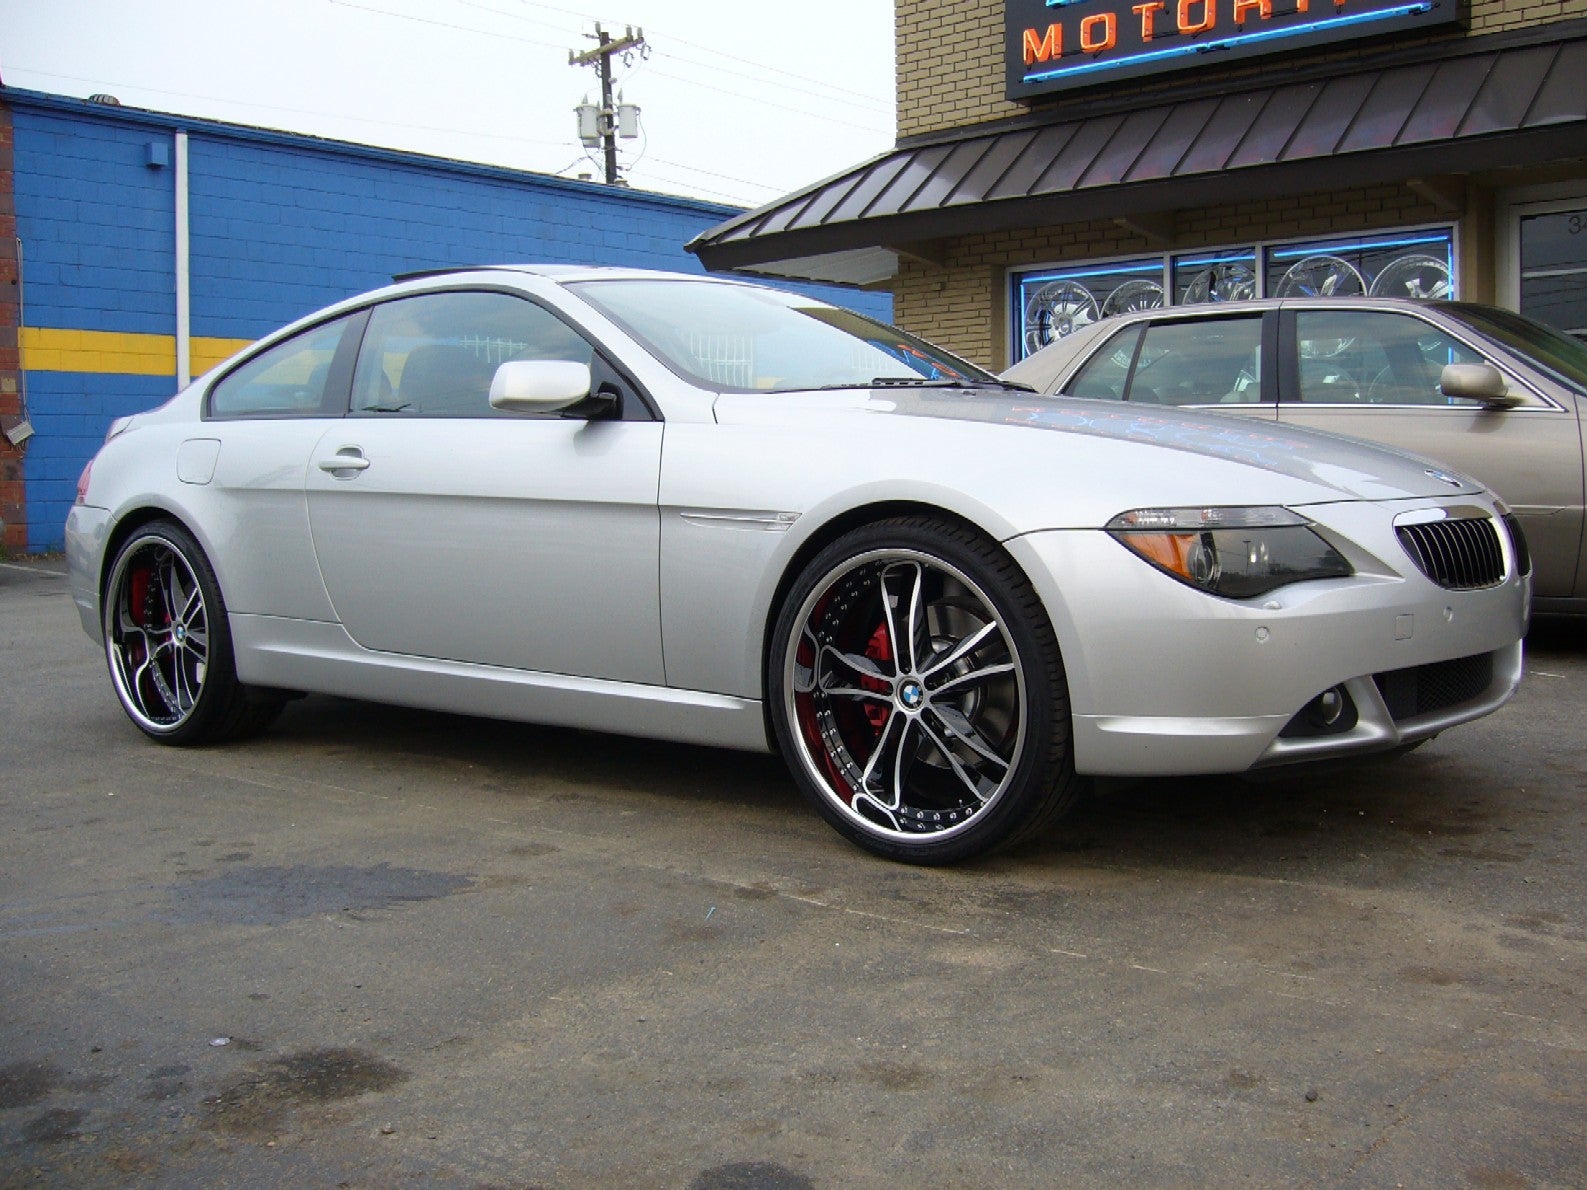  Series on 2007 Bmw 6 Series 650i Coupe  2007 Bmw 650 650i Coupe Picture